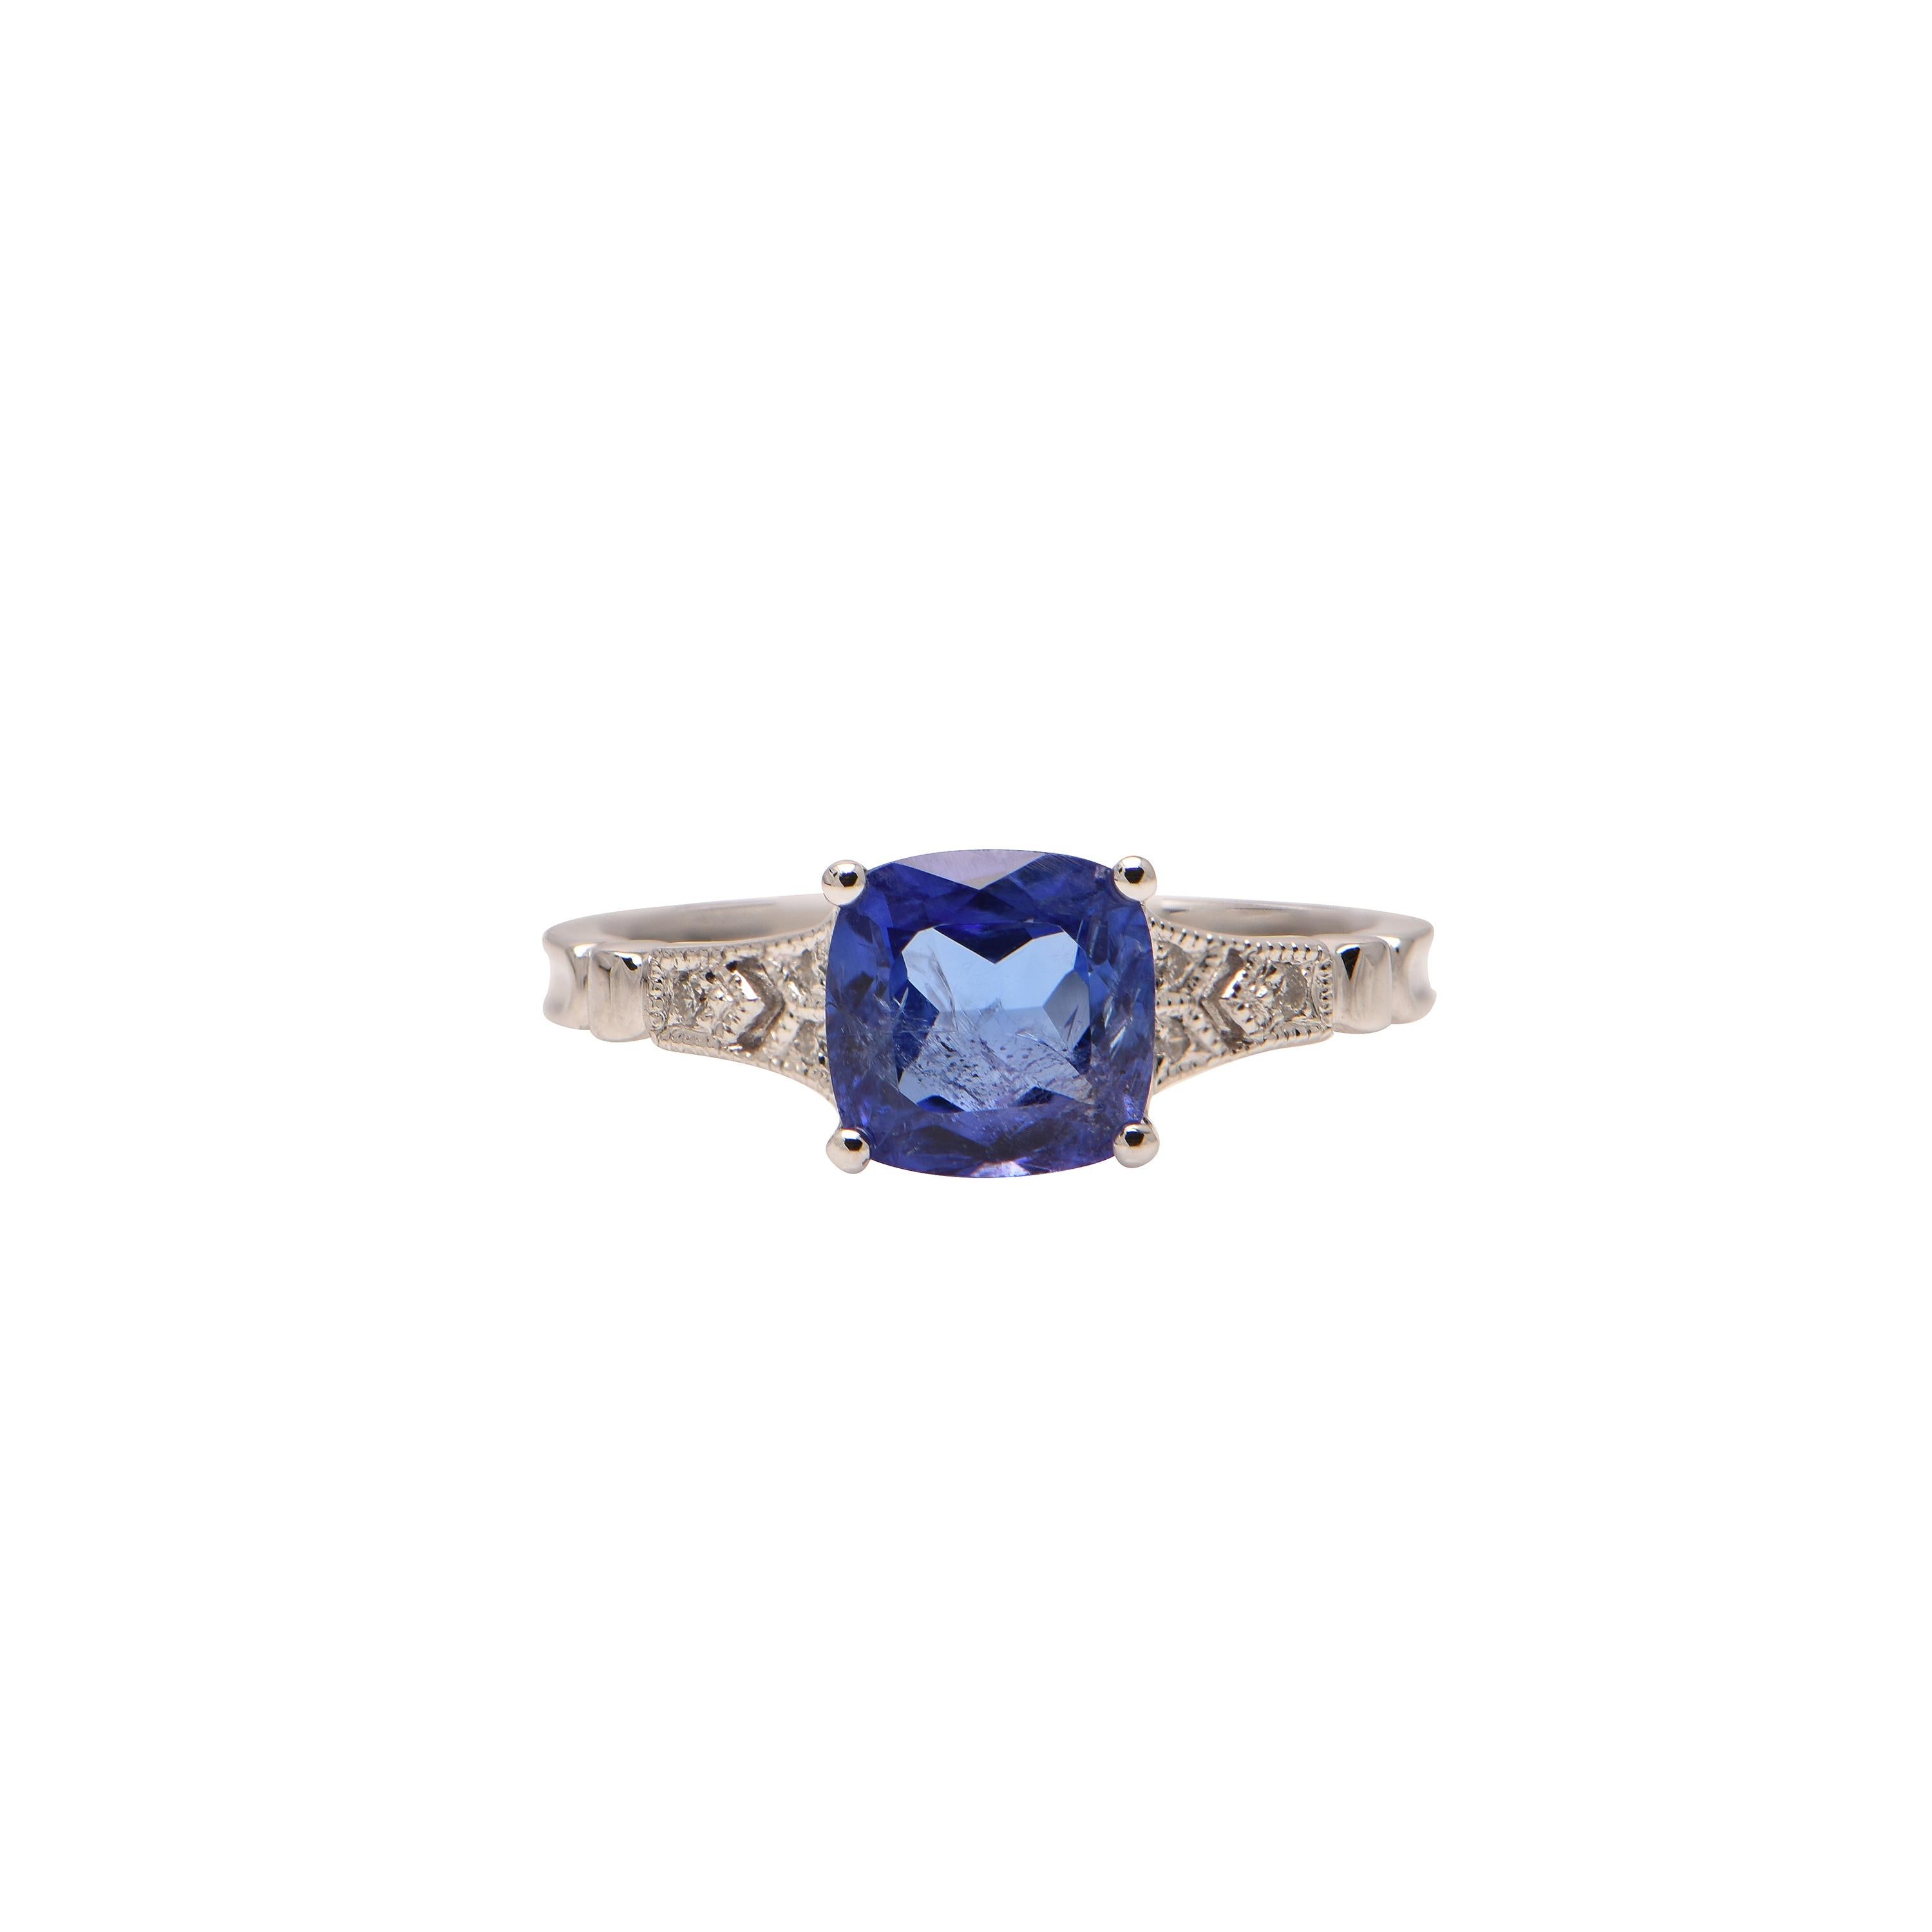 An 18ct White Gold ring showcasing a Tanzanite (1.63ct), and 6 Diamonds totalling 0.04ct.